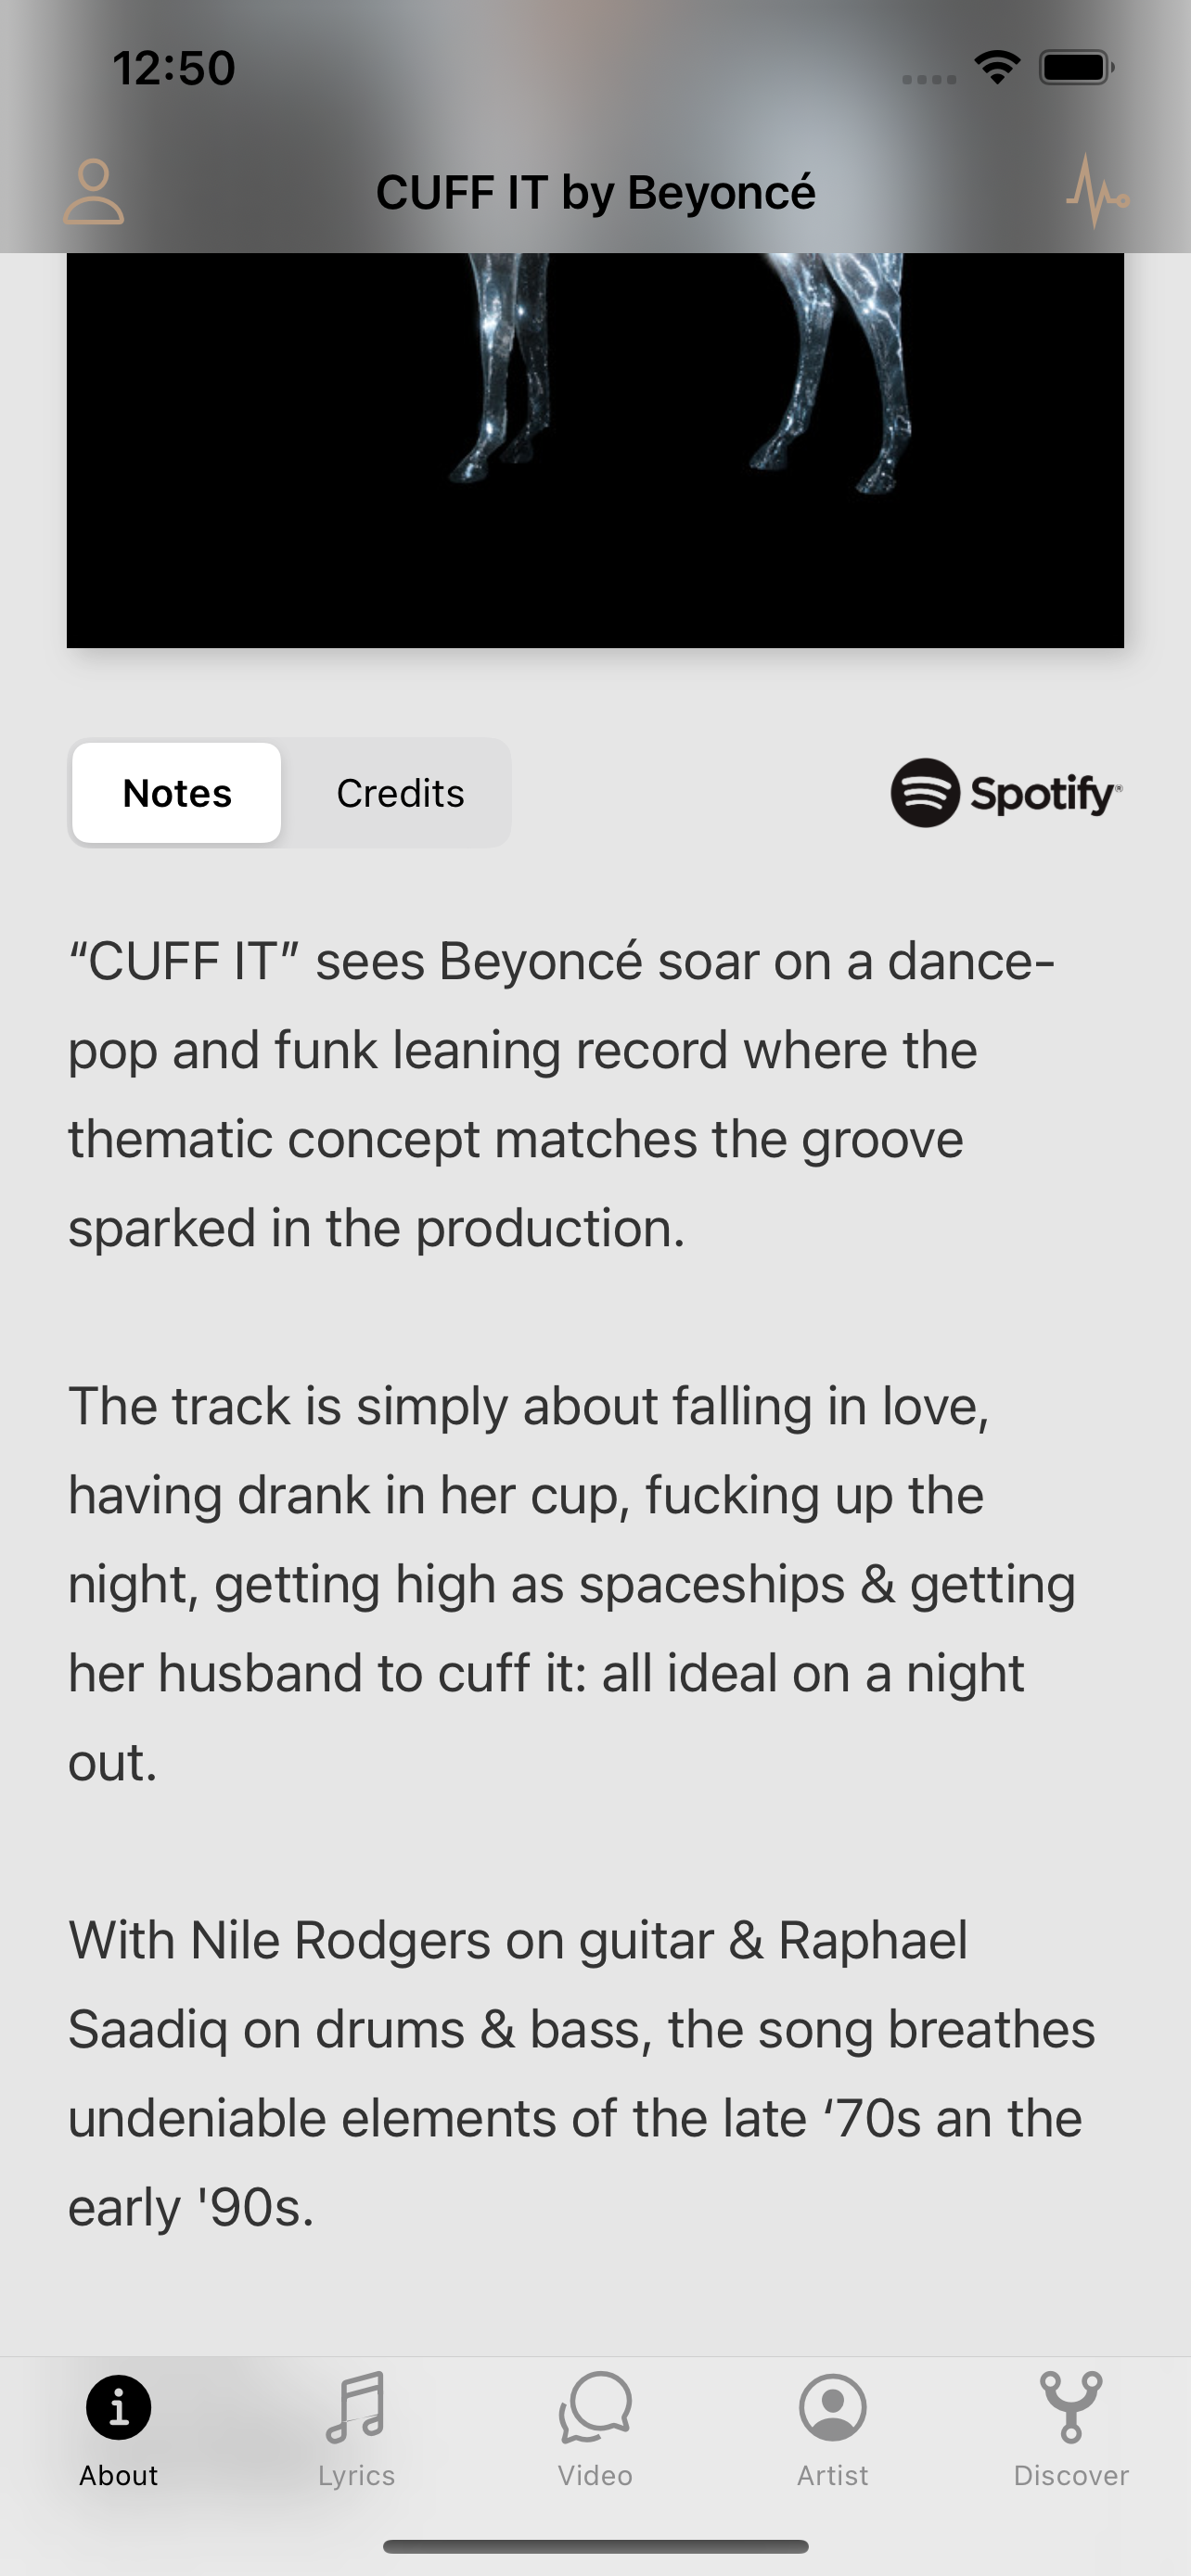 About (Yonce)